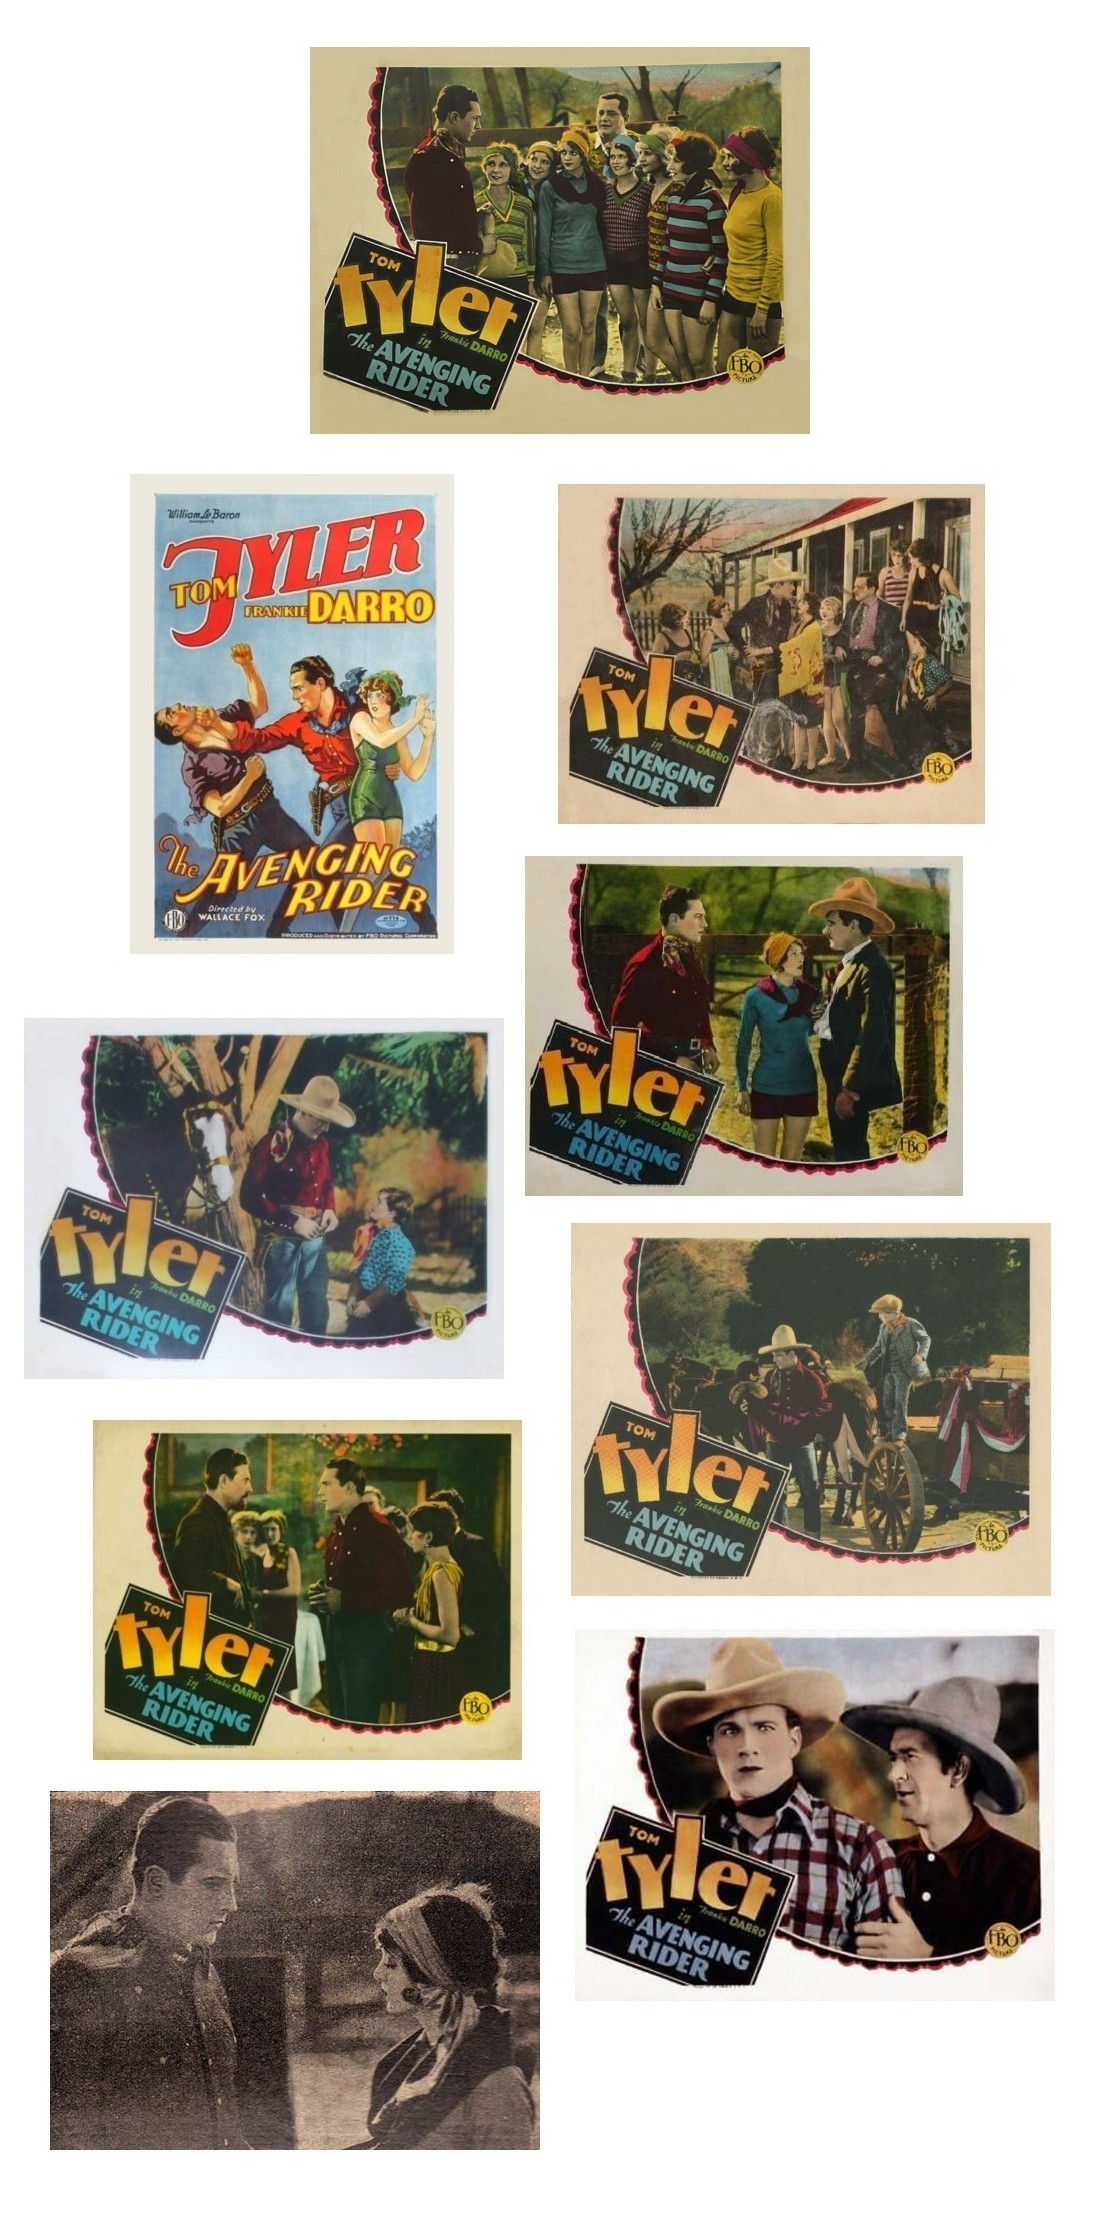 The Avenging Rider one sheet film still and lobby cards